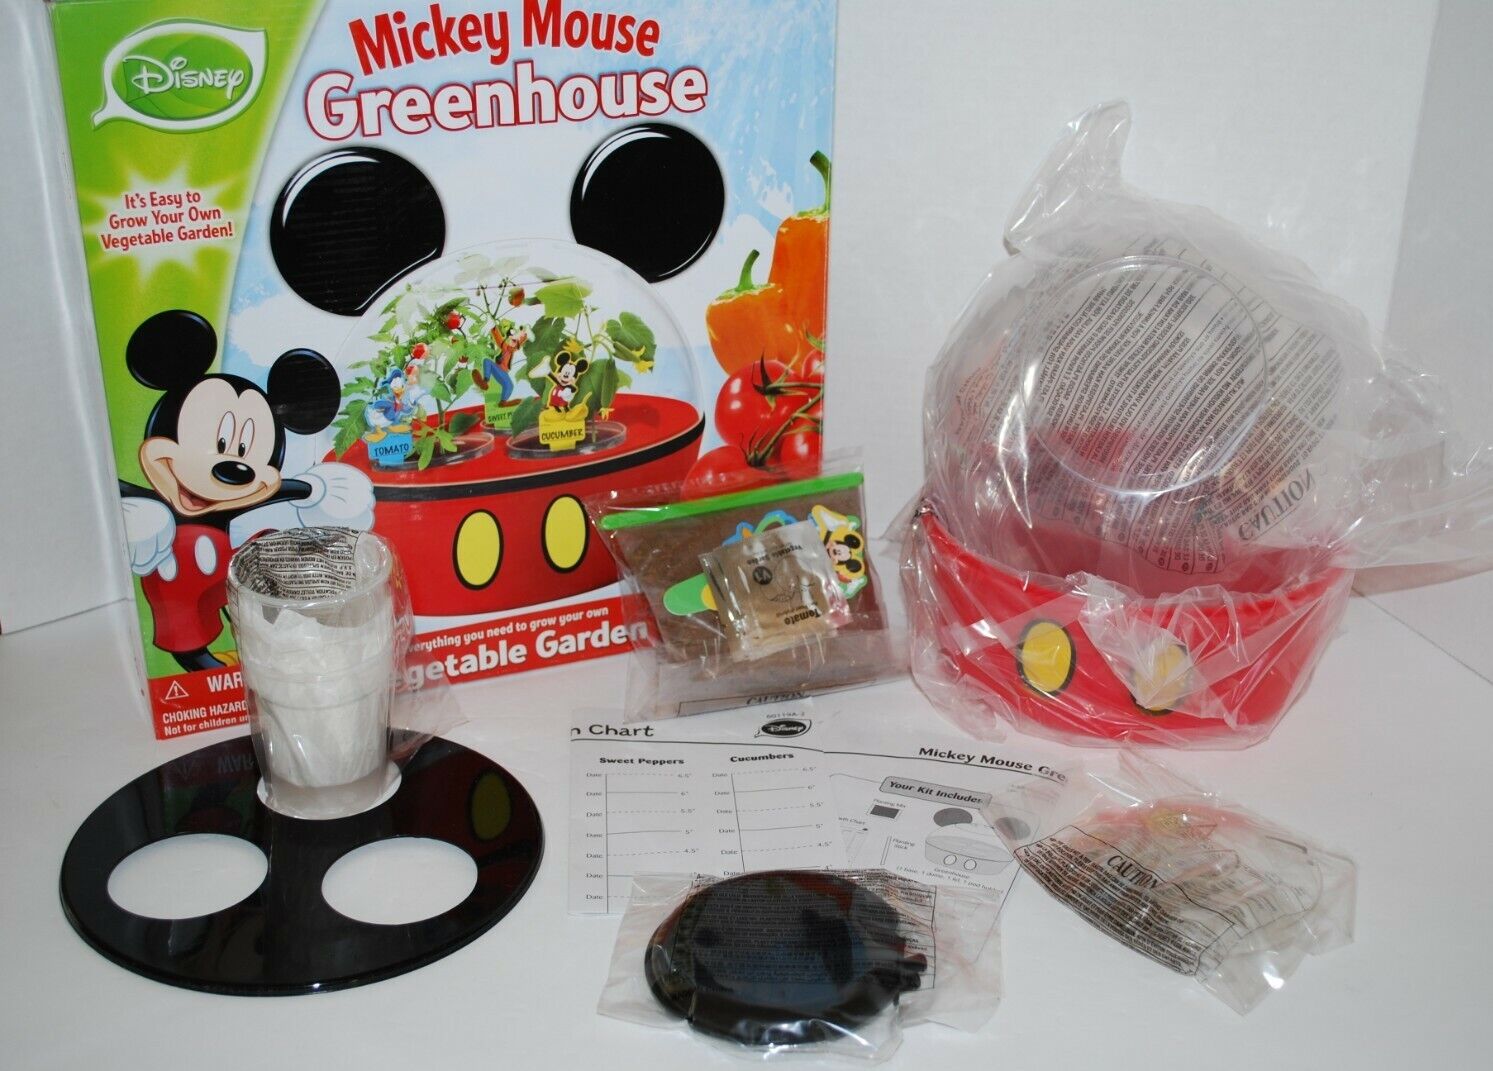 Disney Mickey Mouse Greenhouse Kit. Grow Your Own Vegetable Garden Miracle Grow.